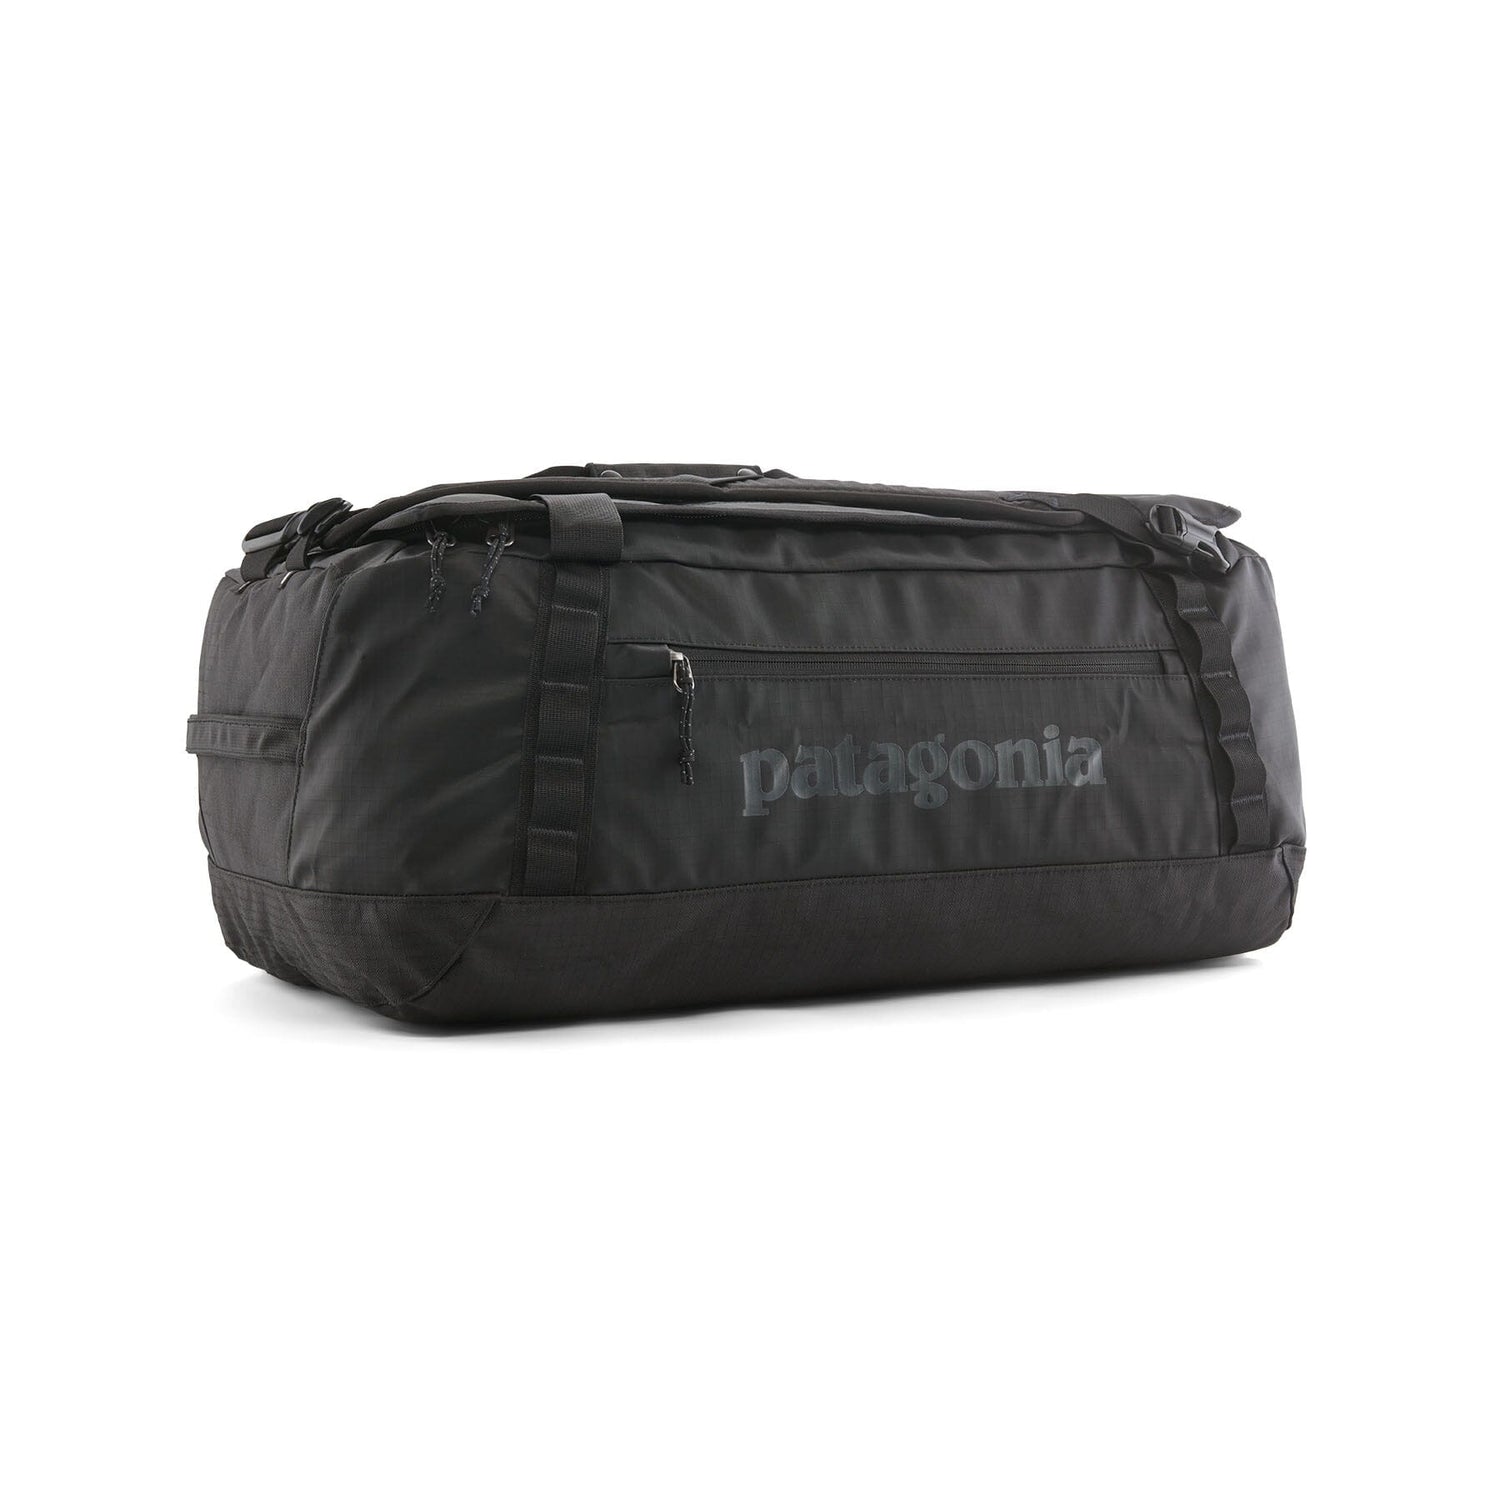 Patagonia Black Hole Duffel 55L - 100% postconsumer recycled polyester Black Bags